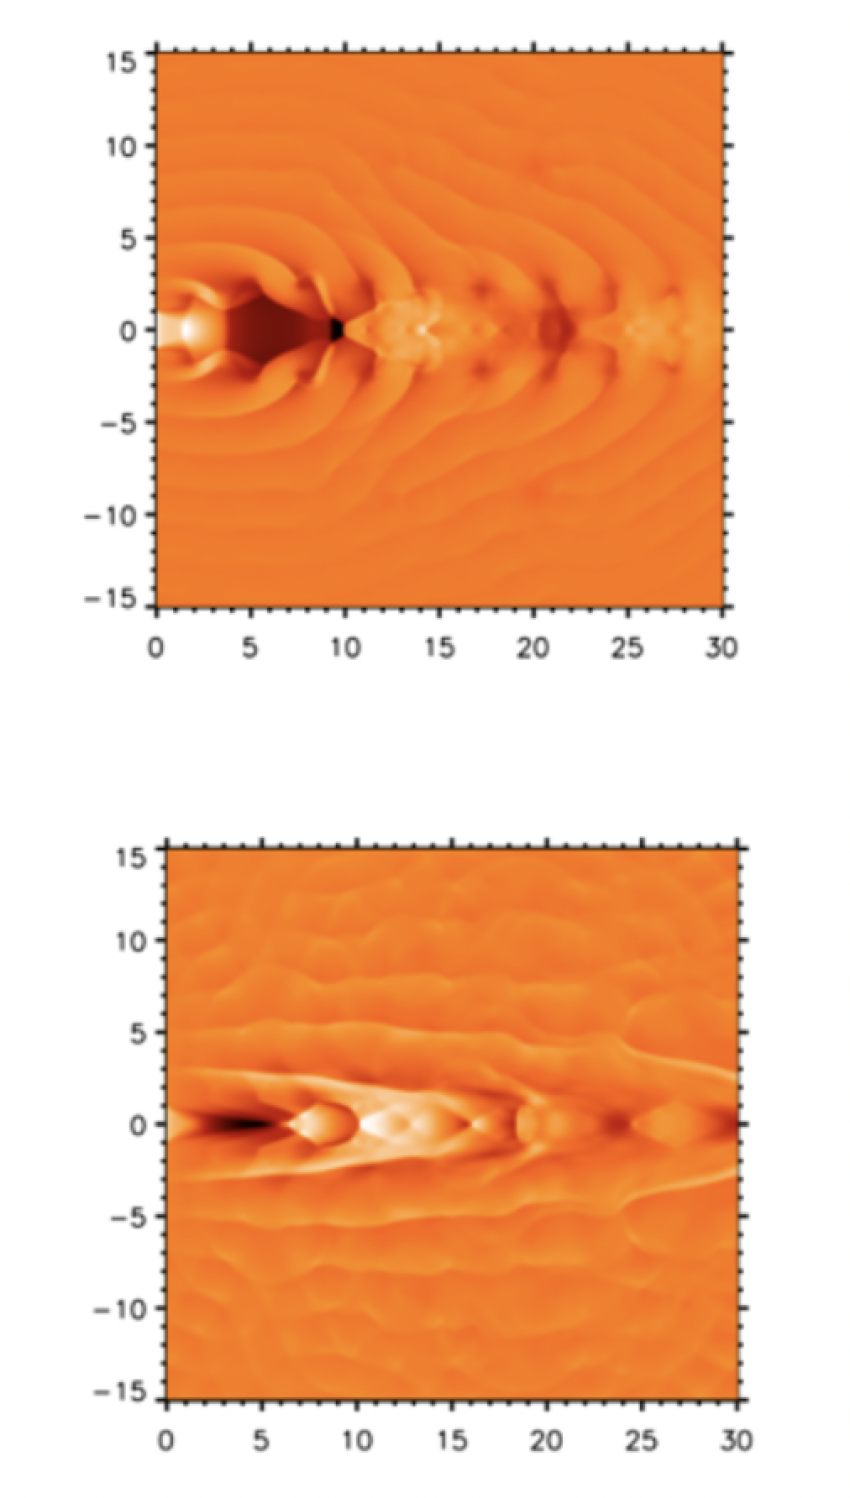 Two different examples of the simulation of one side of symmetric bi-polar jets, where pressure ripples spread out across the extra-galactic medium.